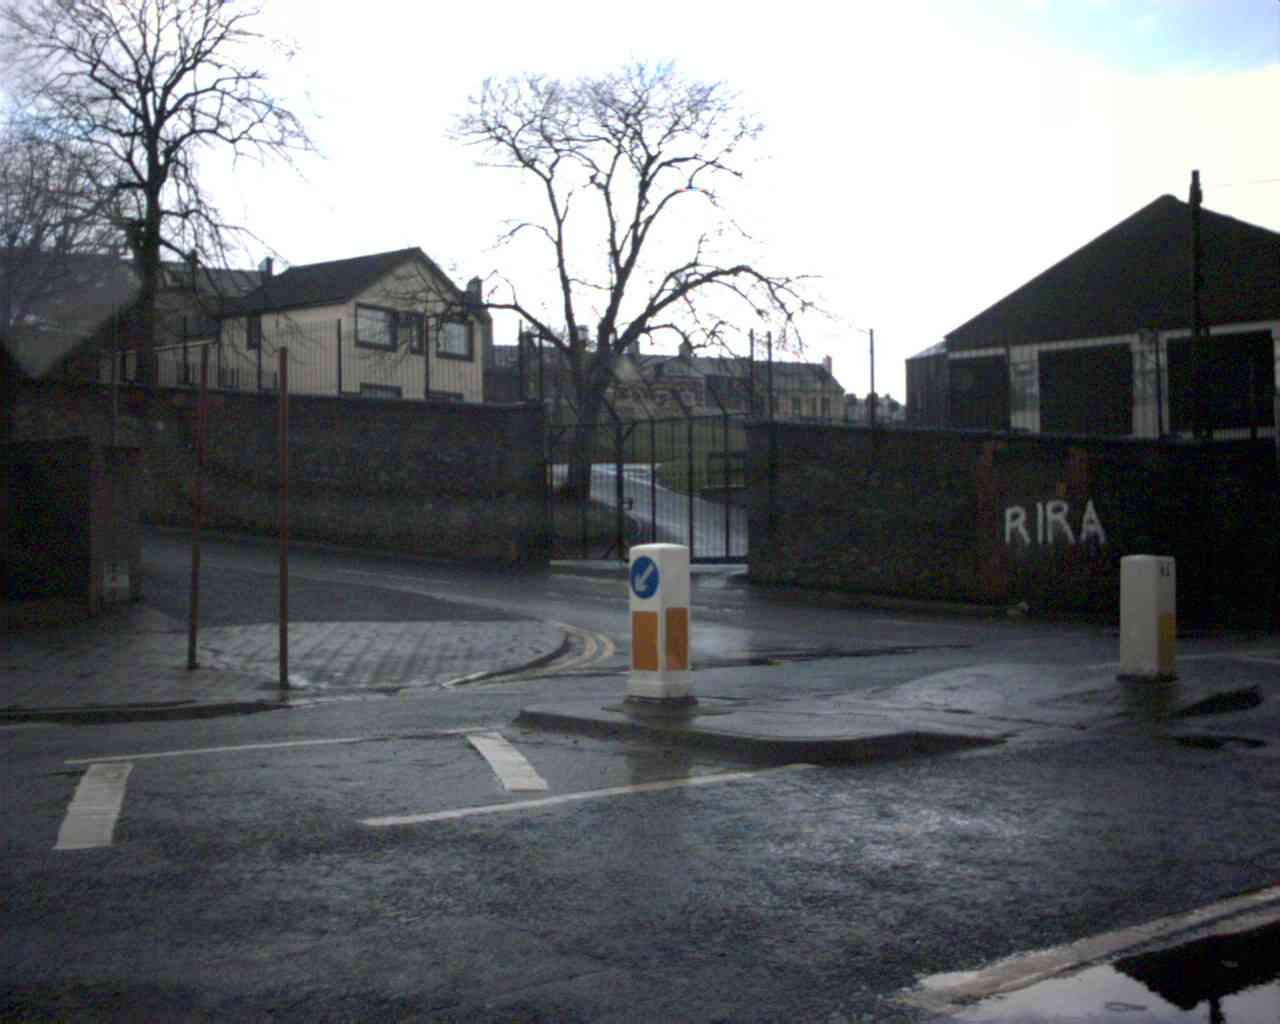 This is a photograph of the former site of Derrys first shirt factory - William Scotts.